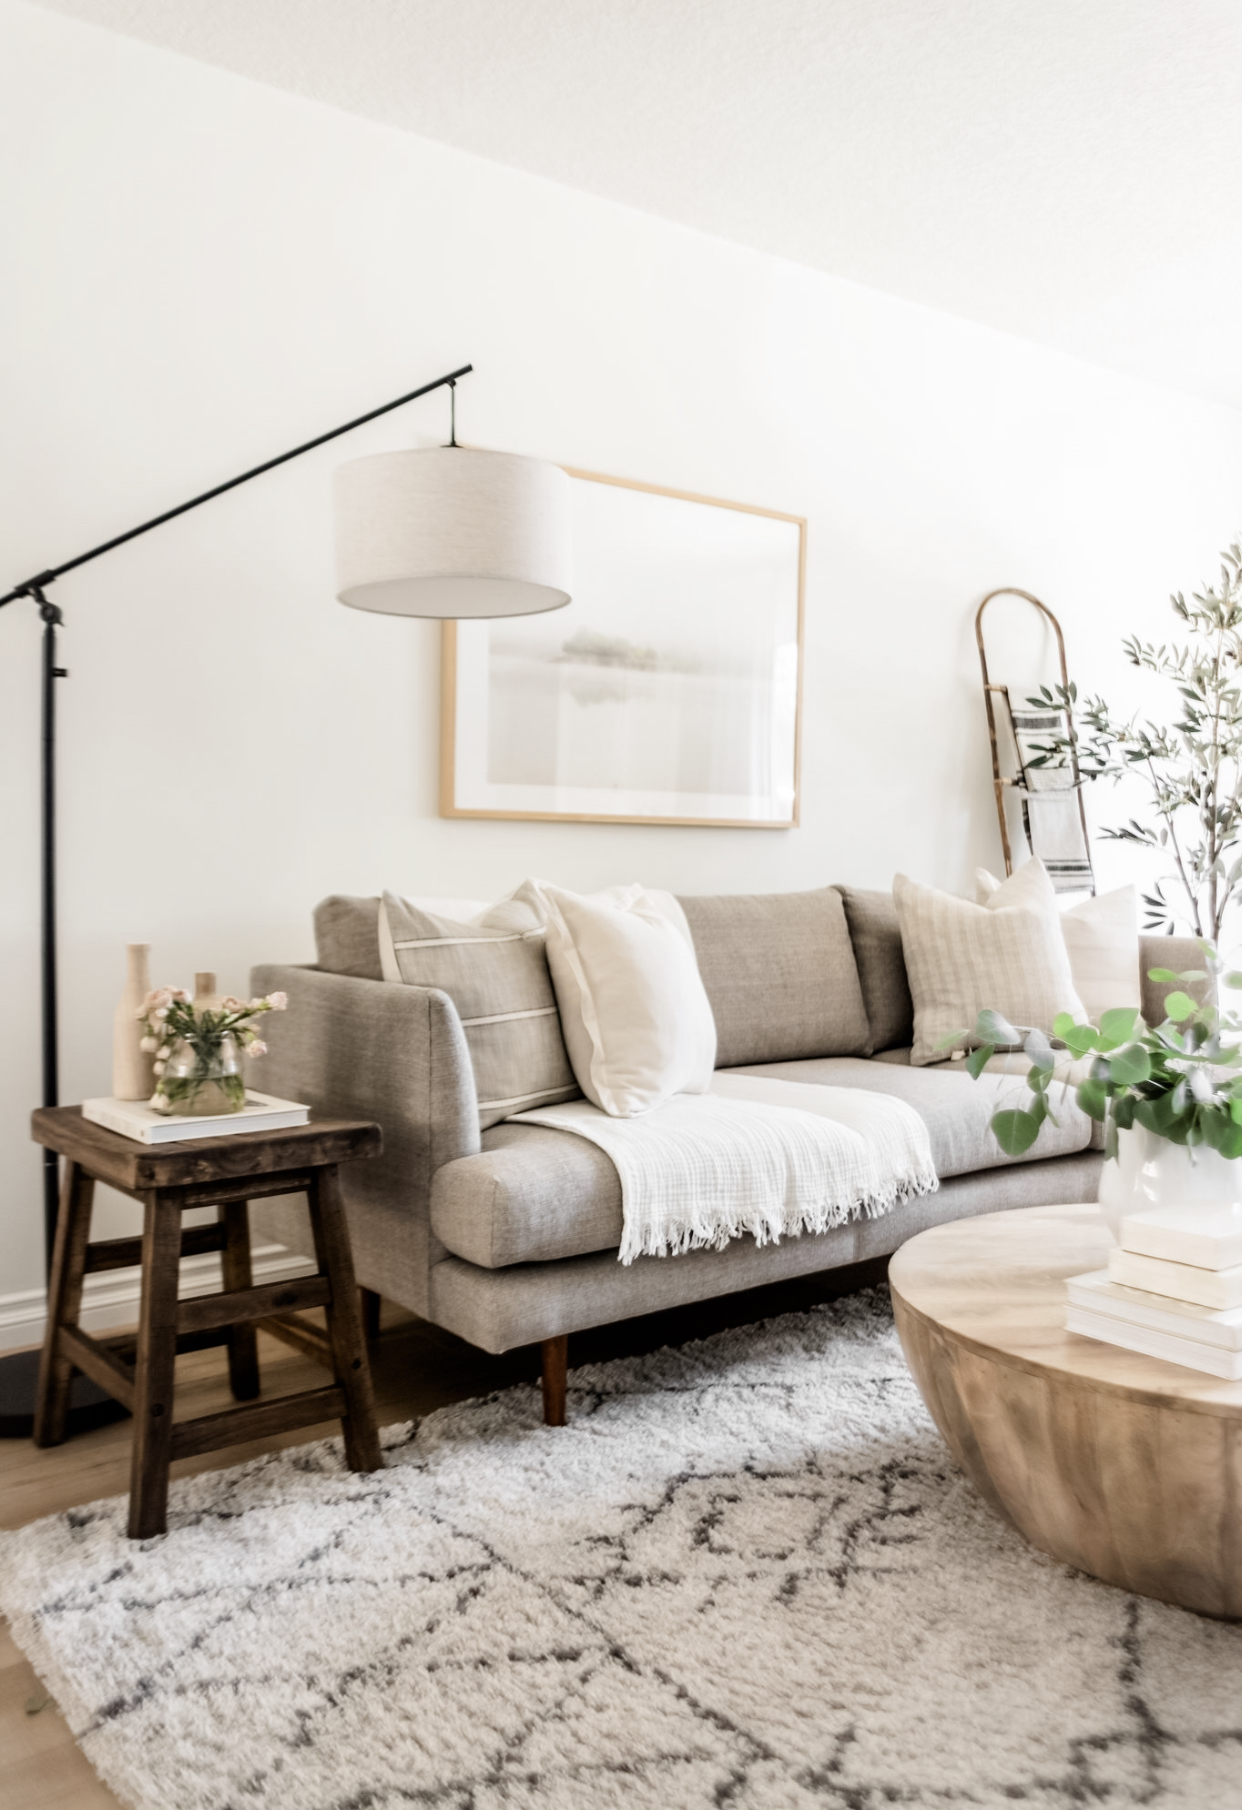 How To Make Your Living Room Look Bigger (for a Budget) – Arts and Classy